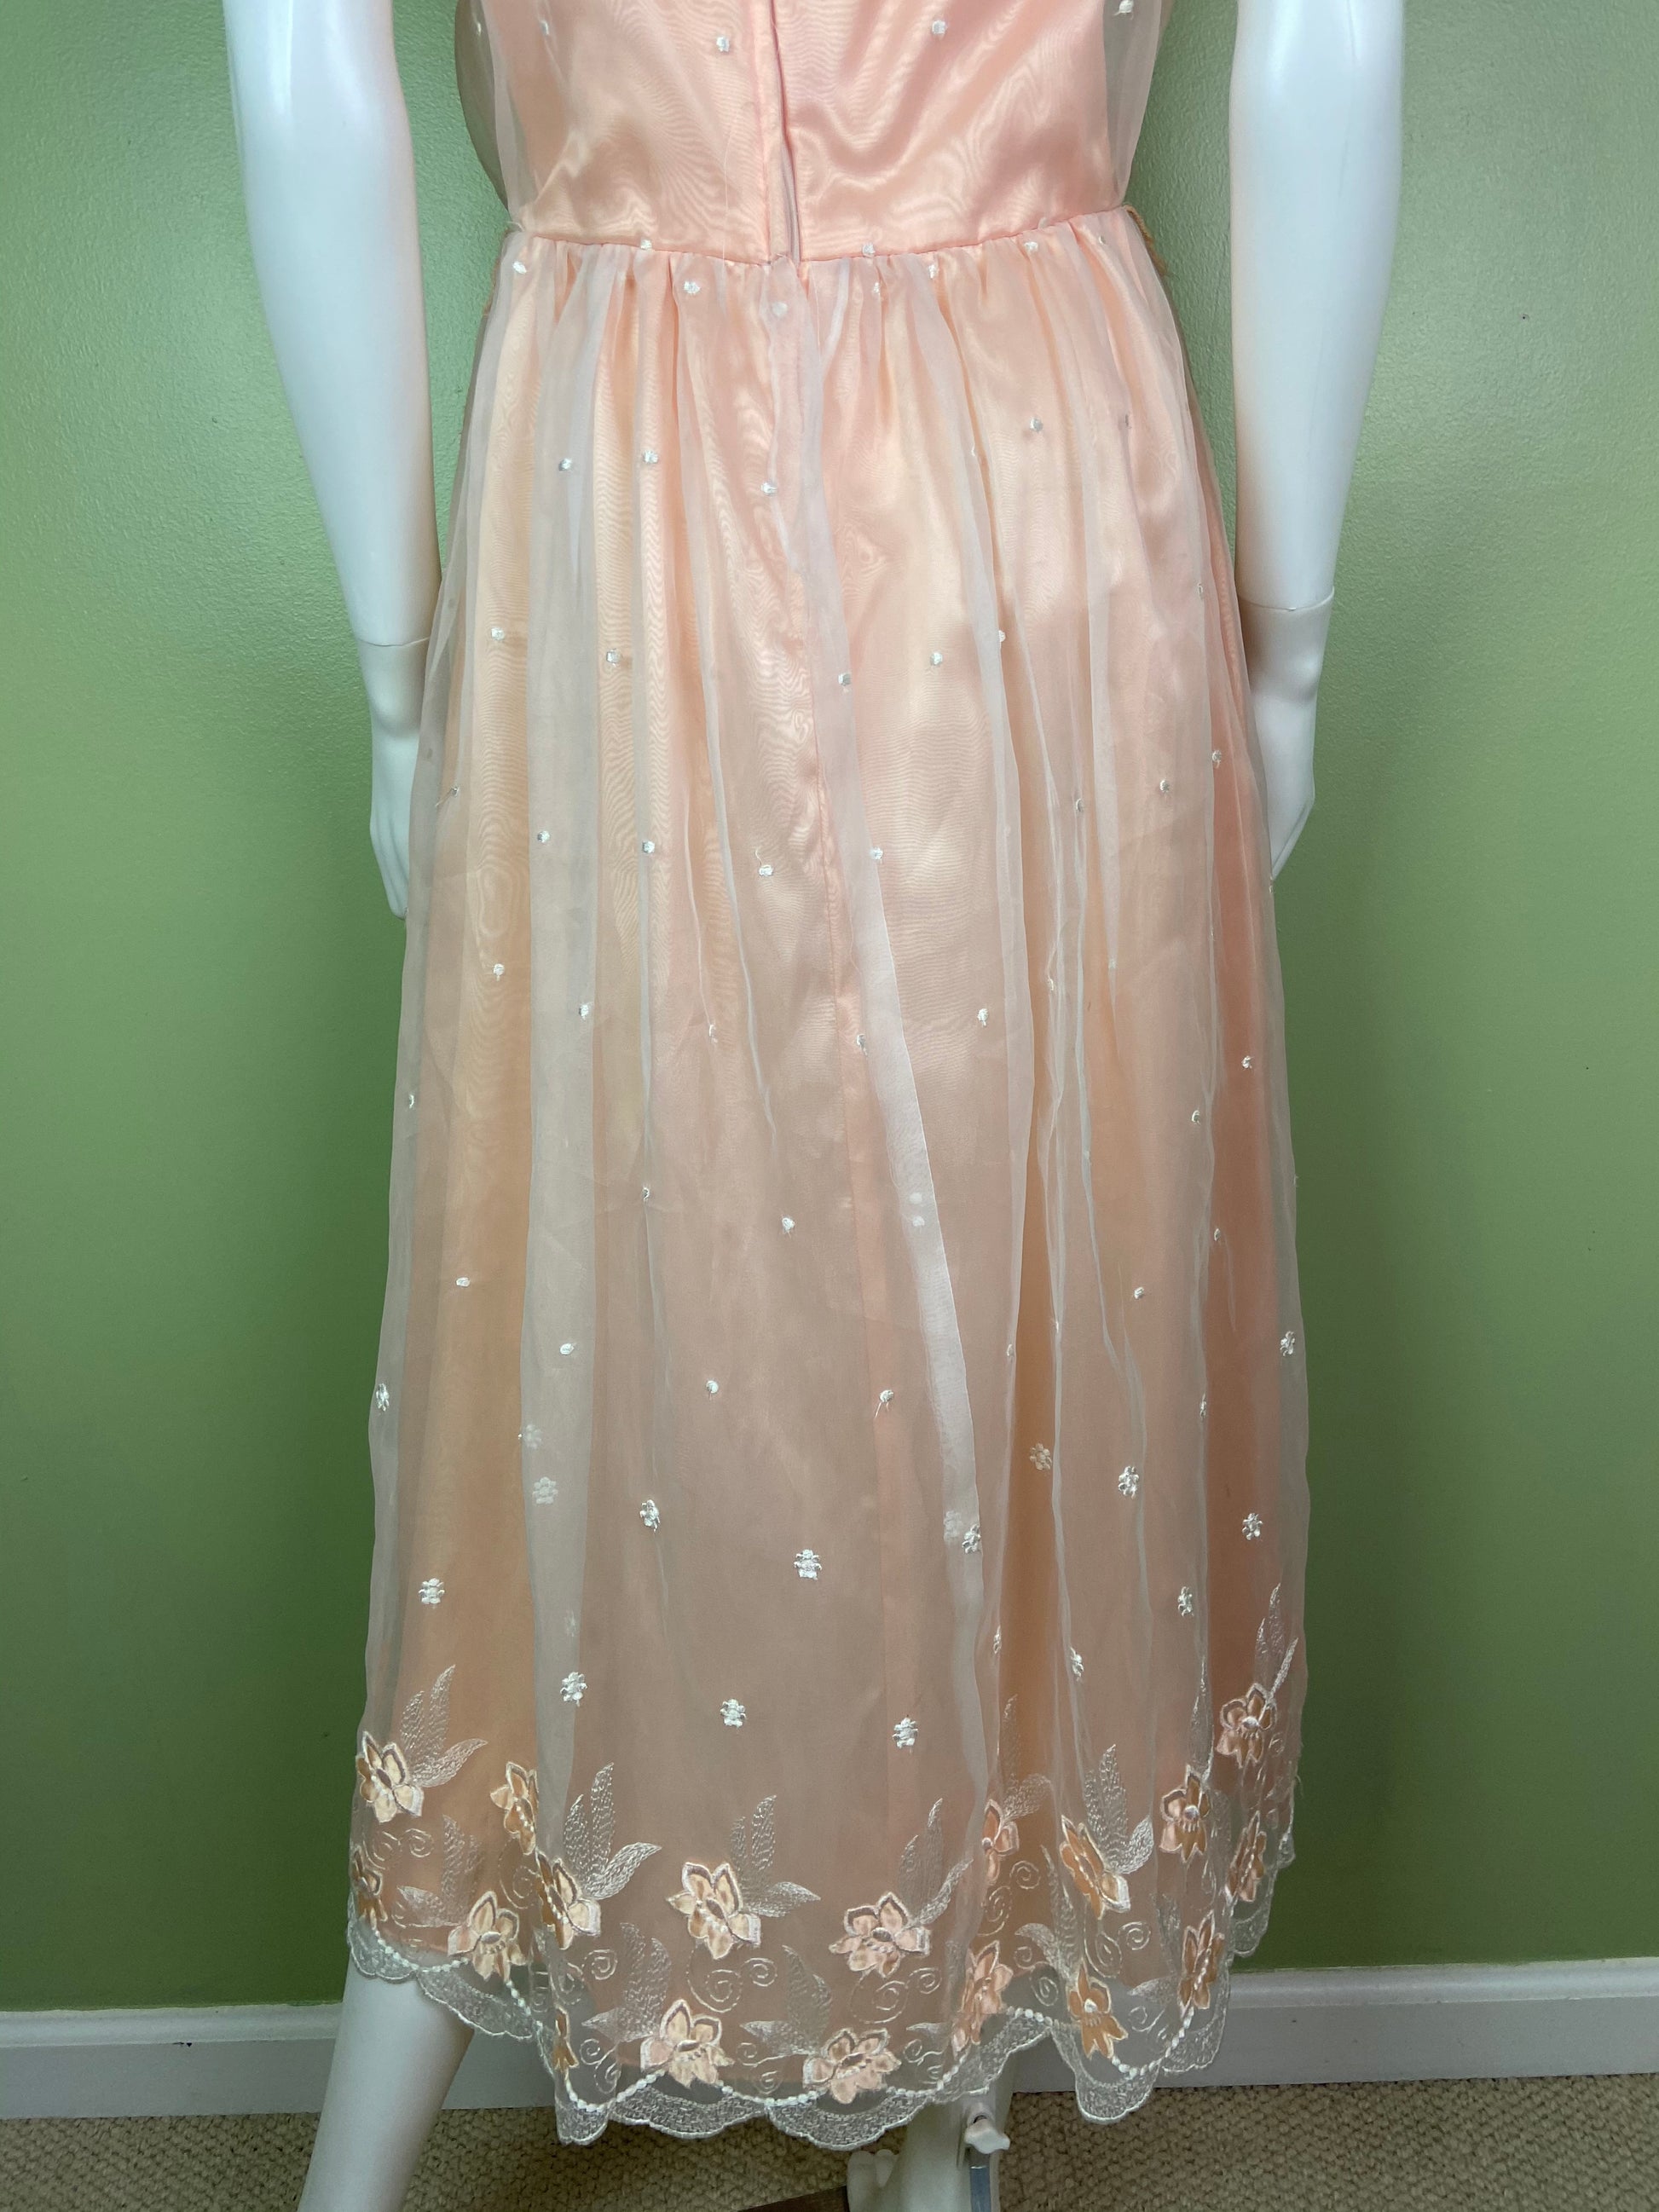 Vintage Victorian Bespoke Pink Peach Satin Sheer Embroidered Floral Lace Dress Gown Abby Essie